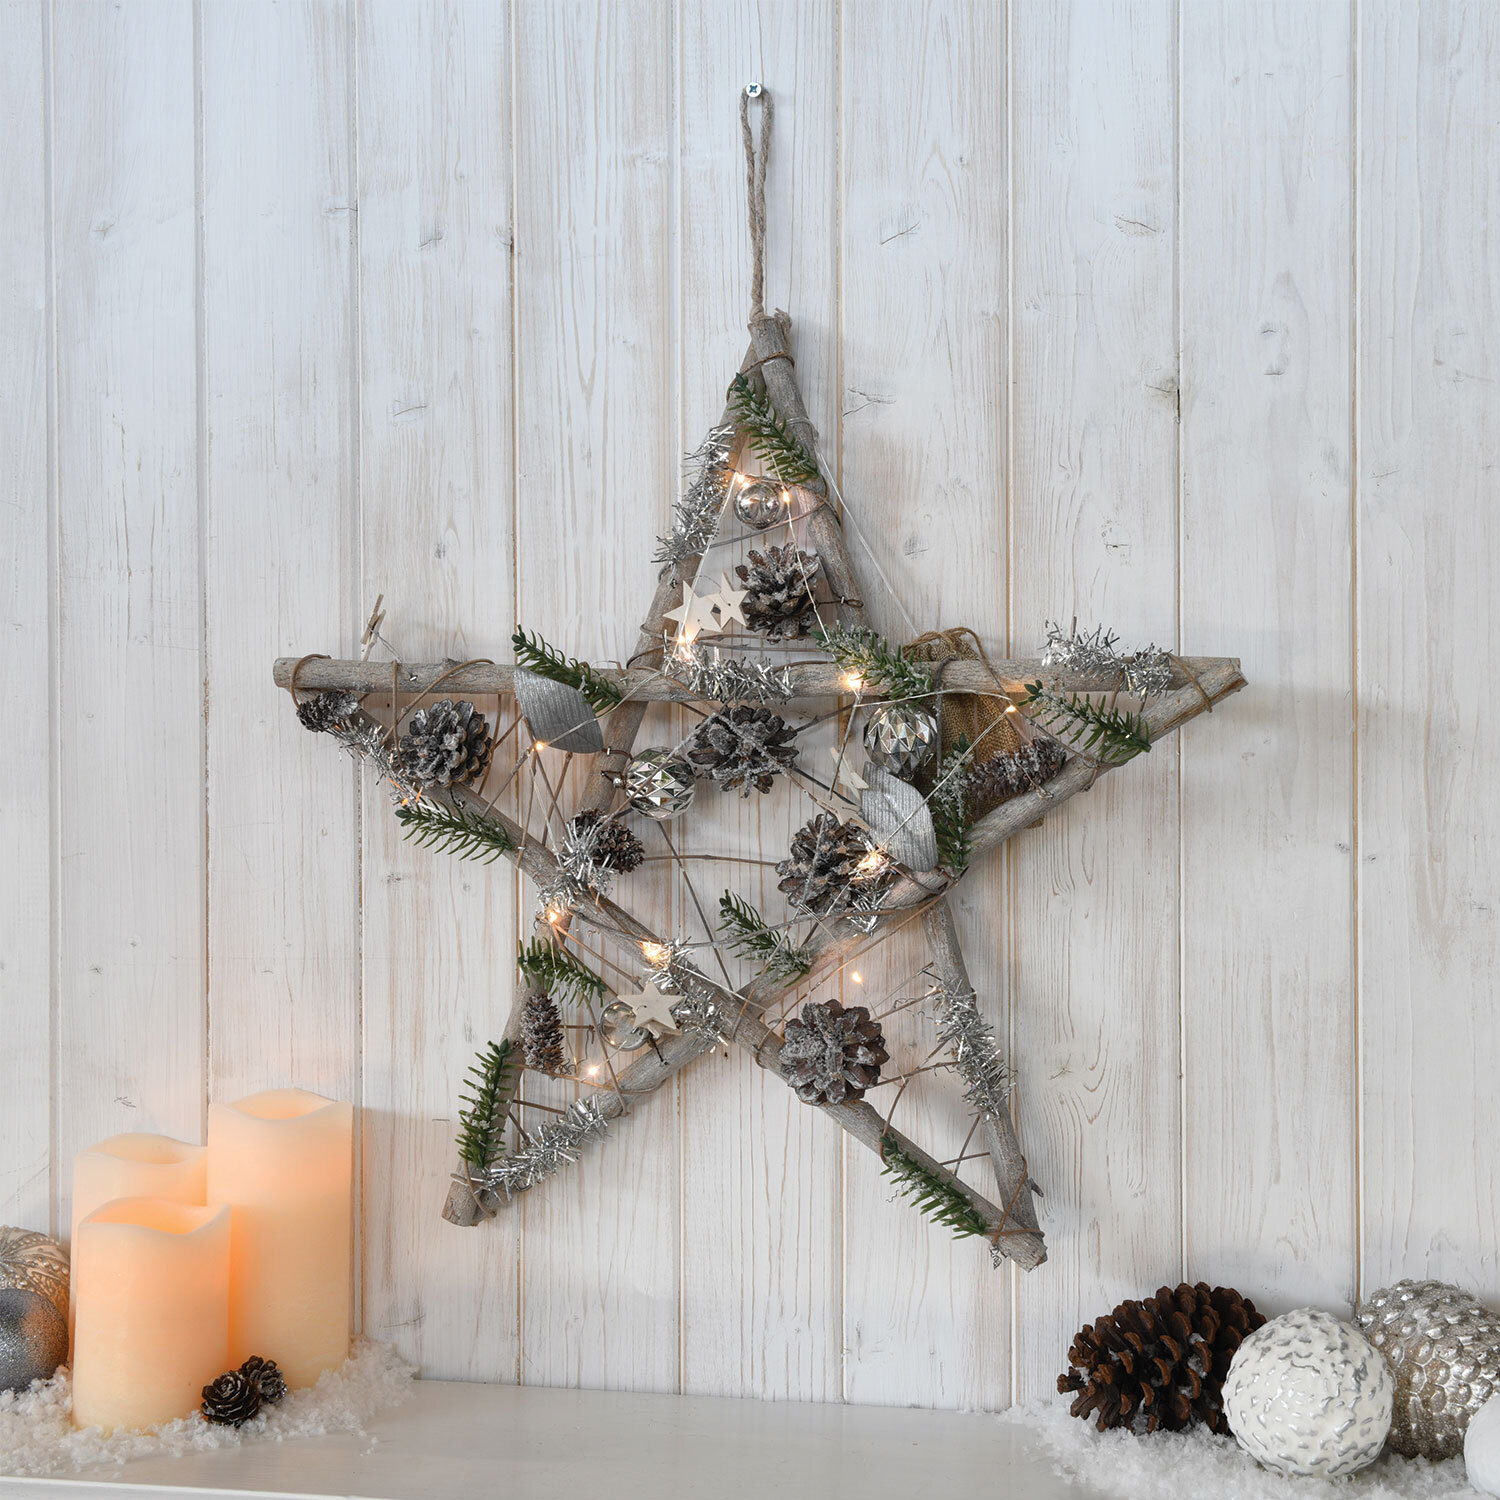 Alpine Lodge Light Up Star with Floristry Christmas Ornament Image 1